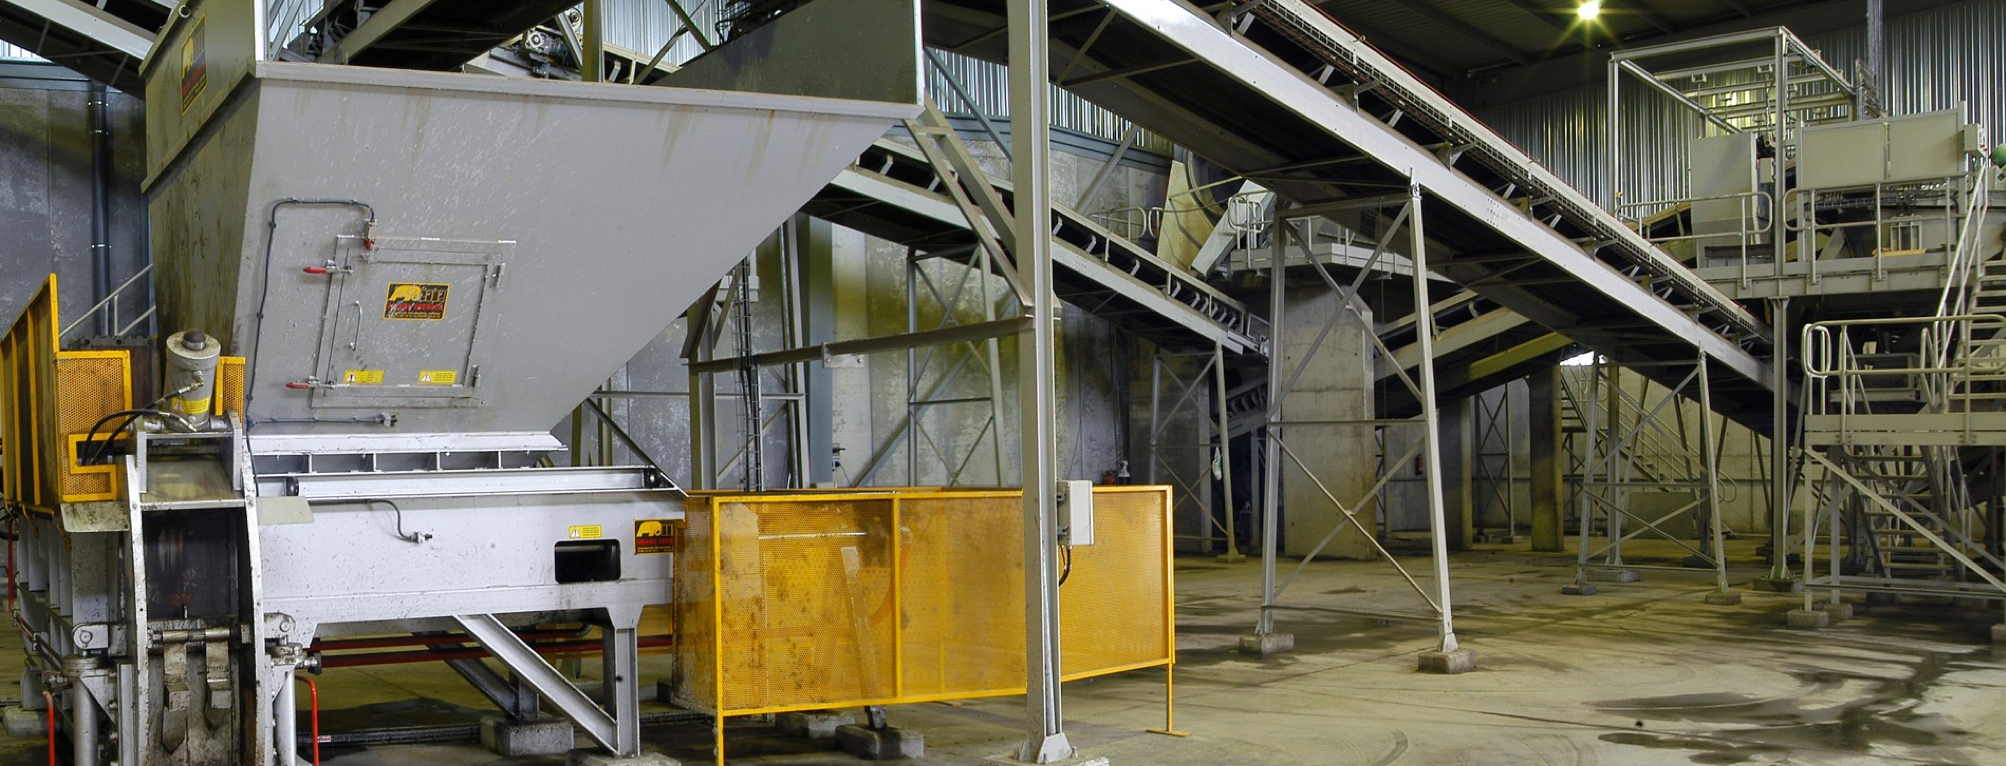 energy from waste facility process equipment